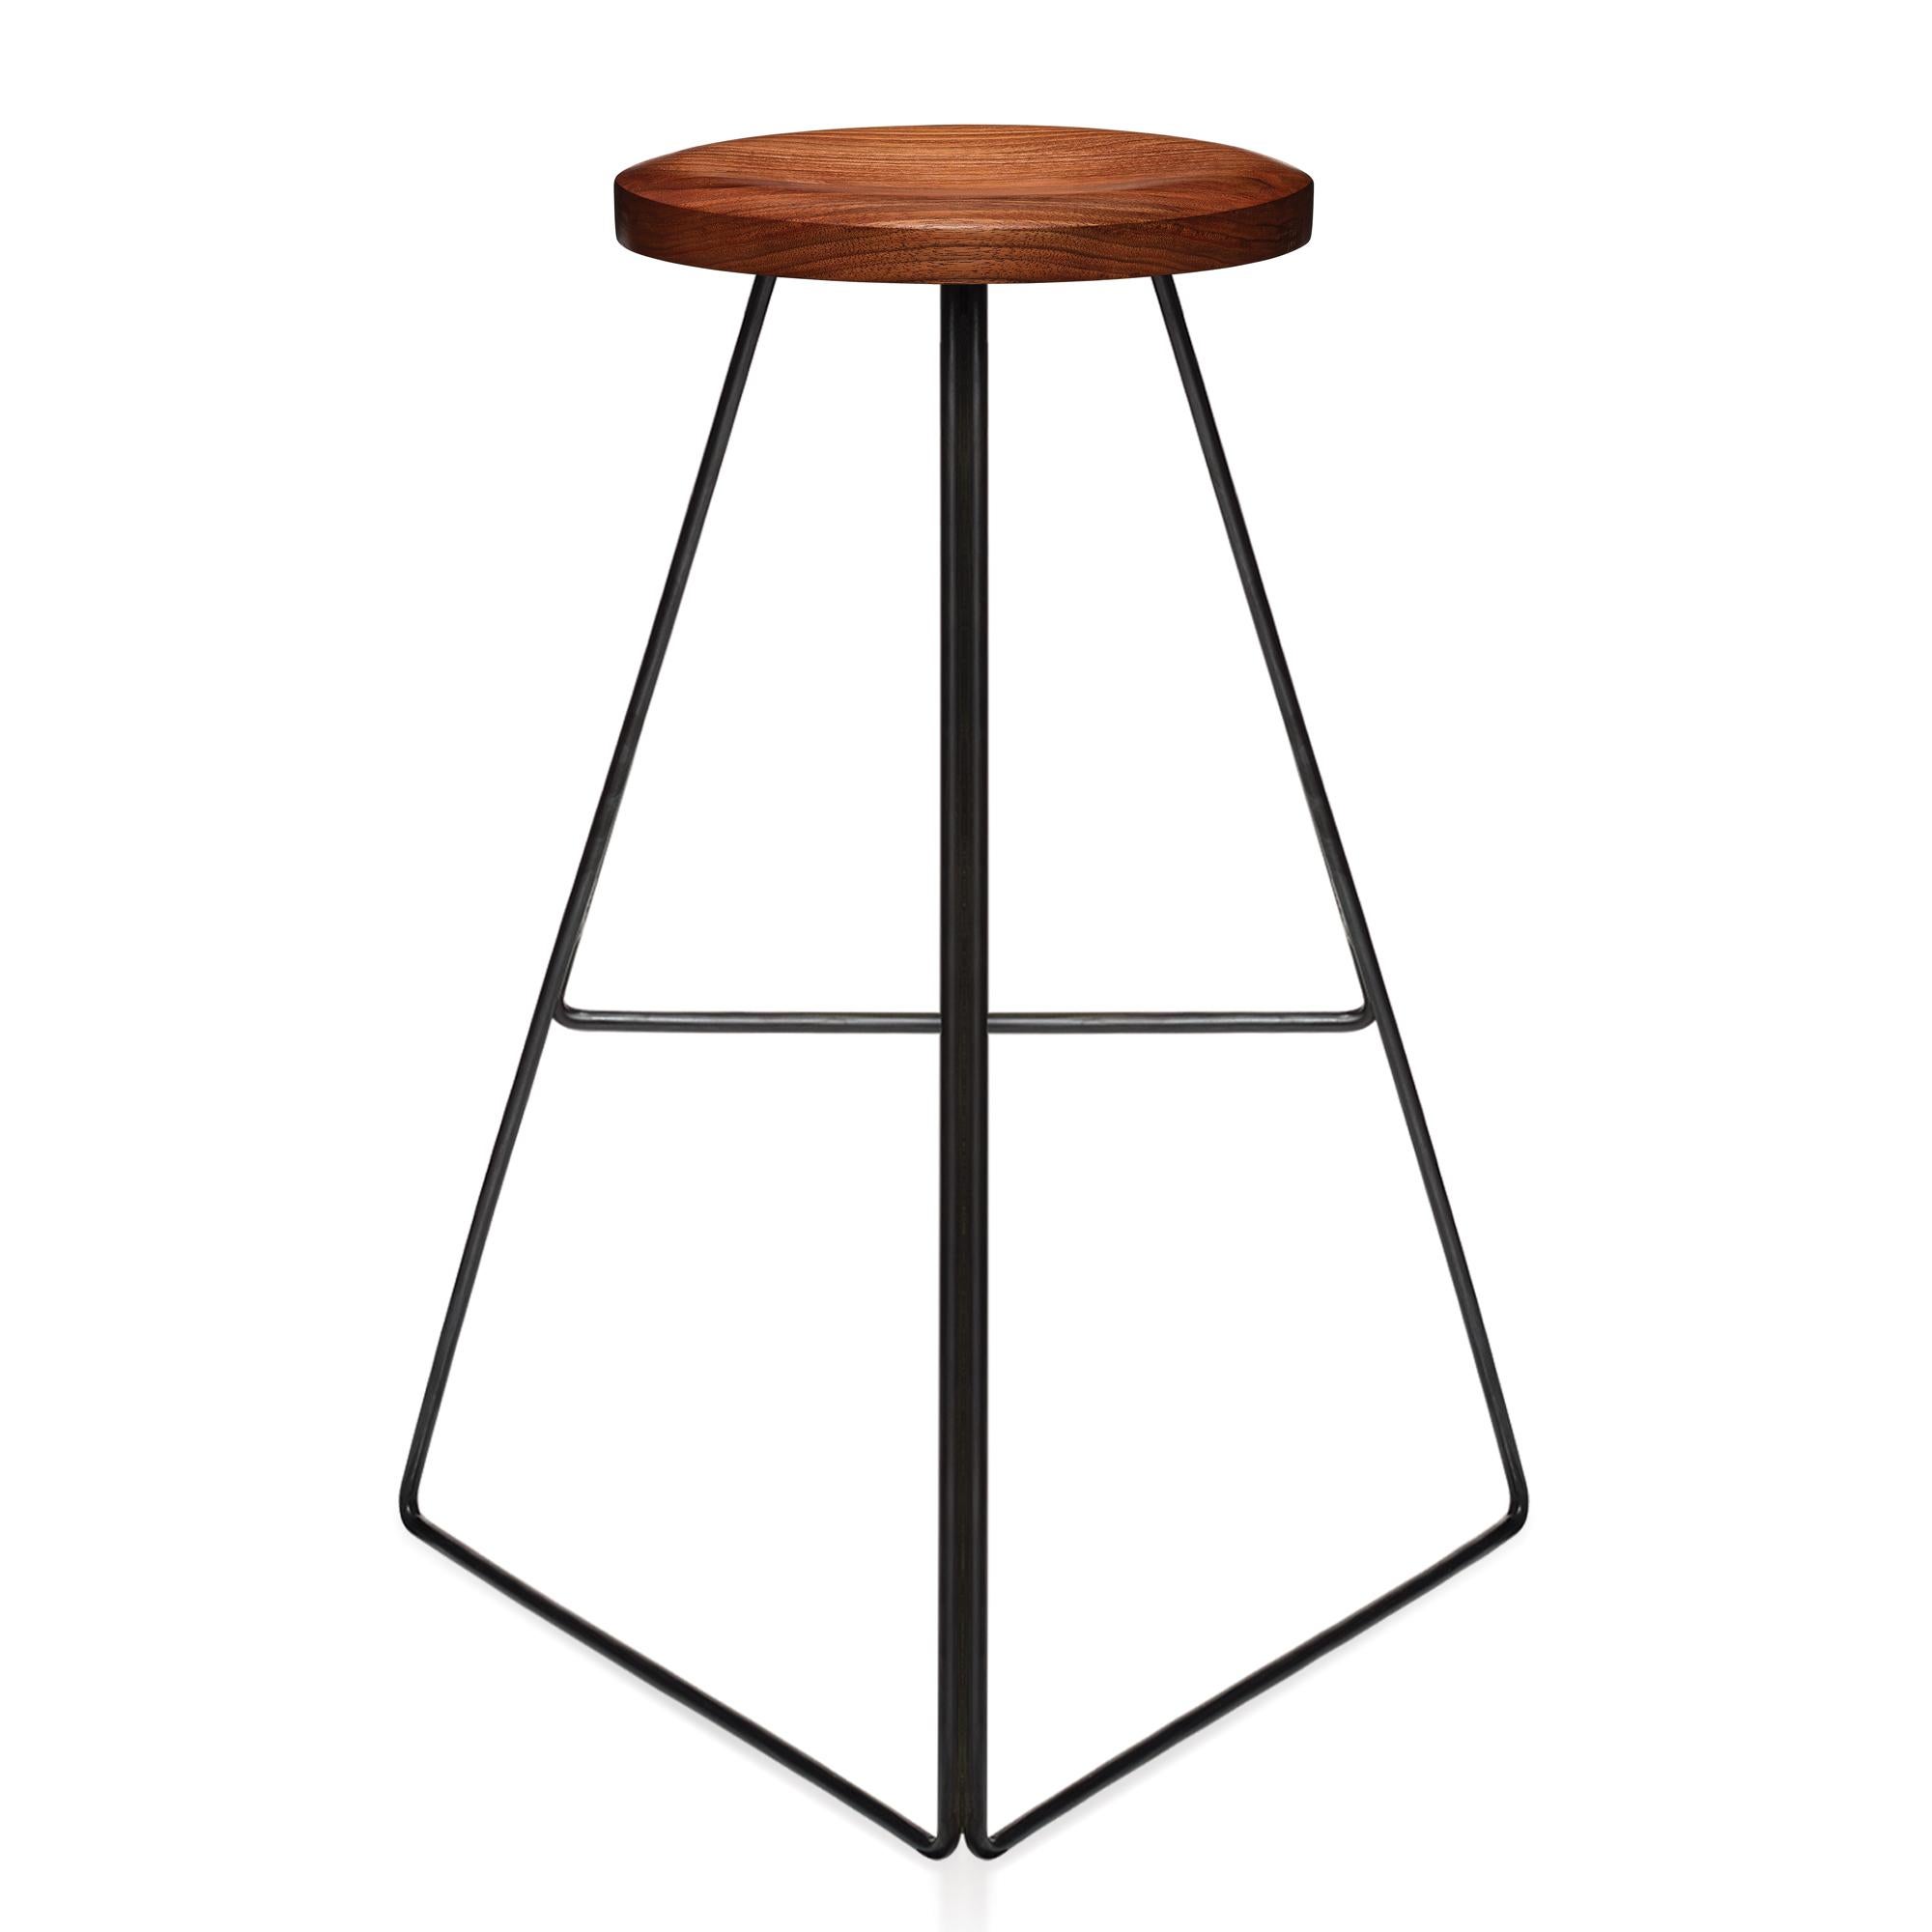 Powder-Coated Coleman Stool, Black and Walnut, Counter Height, 54 Variations Available For Sale